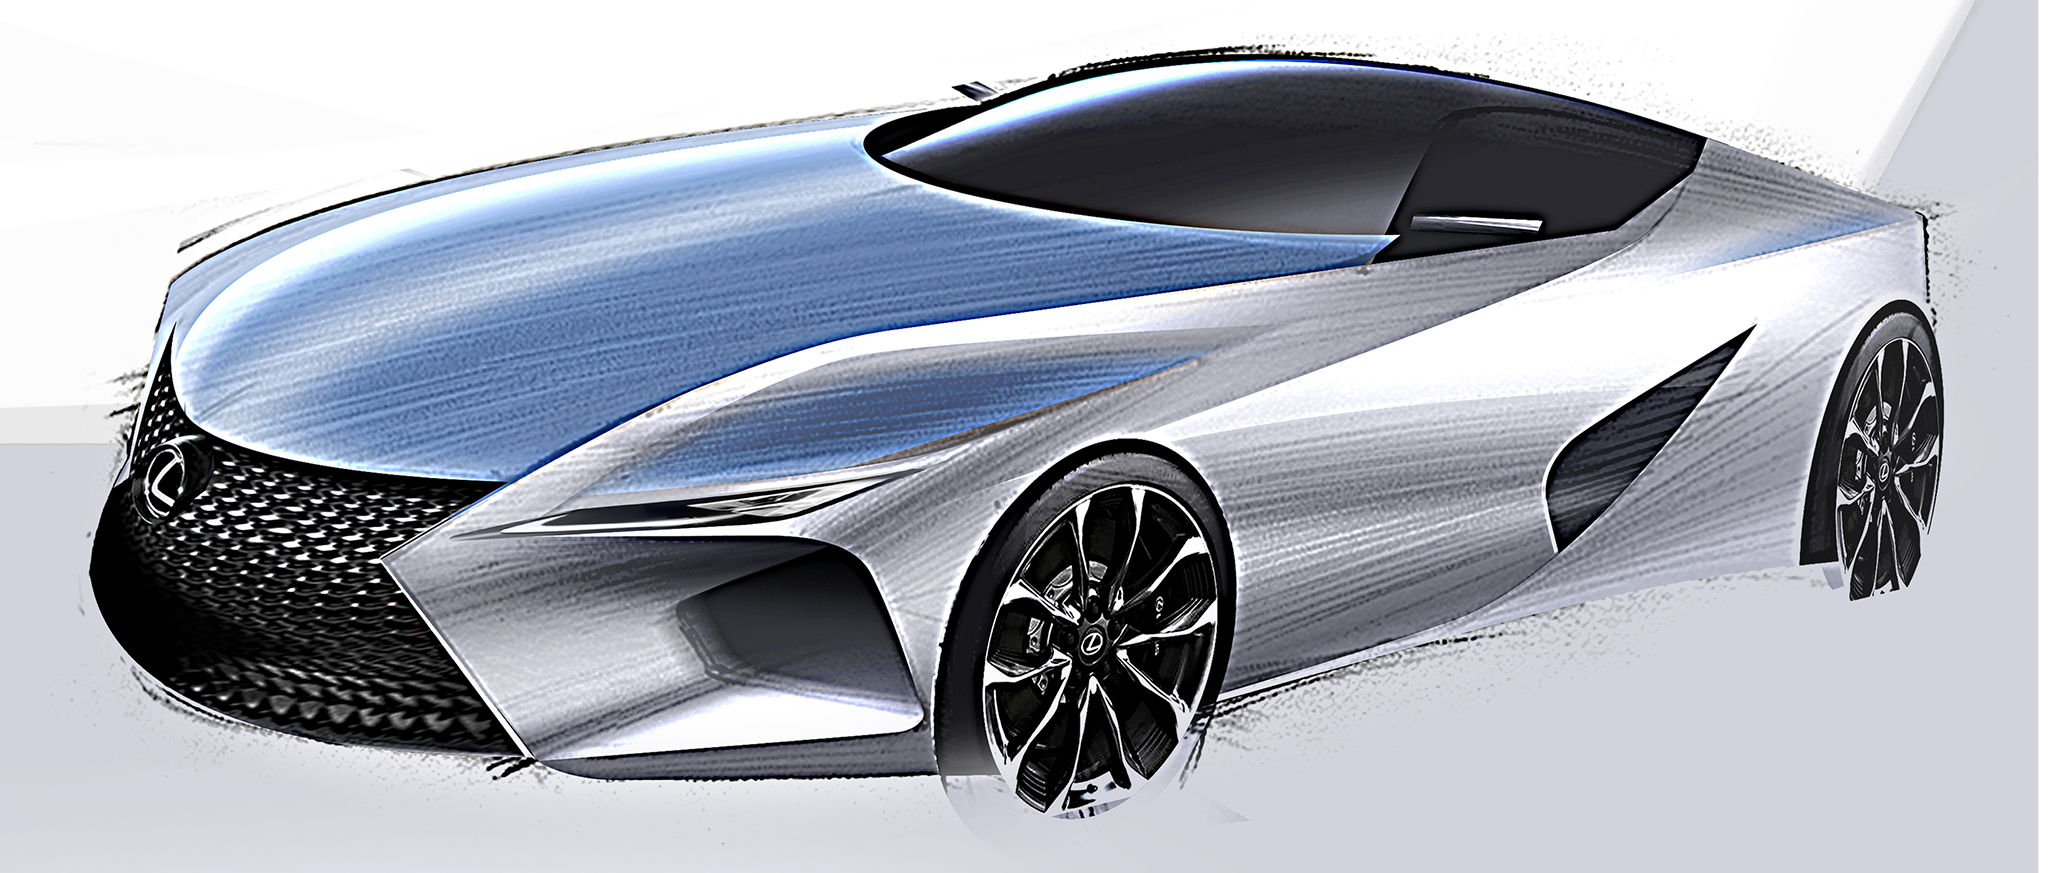 You are currently viewing Step-by-Step Rendering of a Sports Car